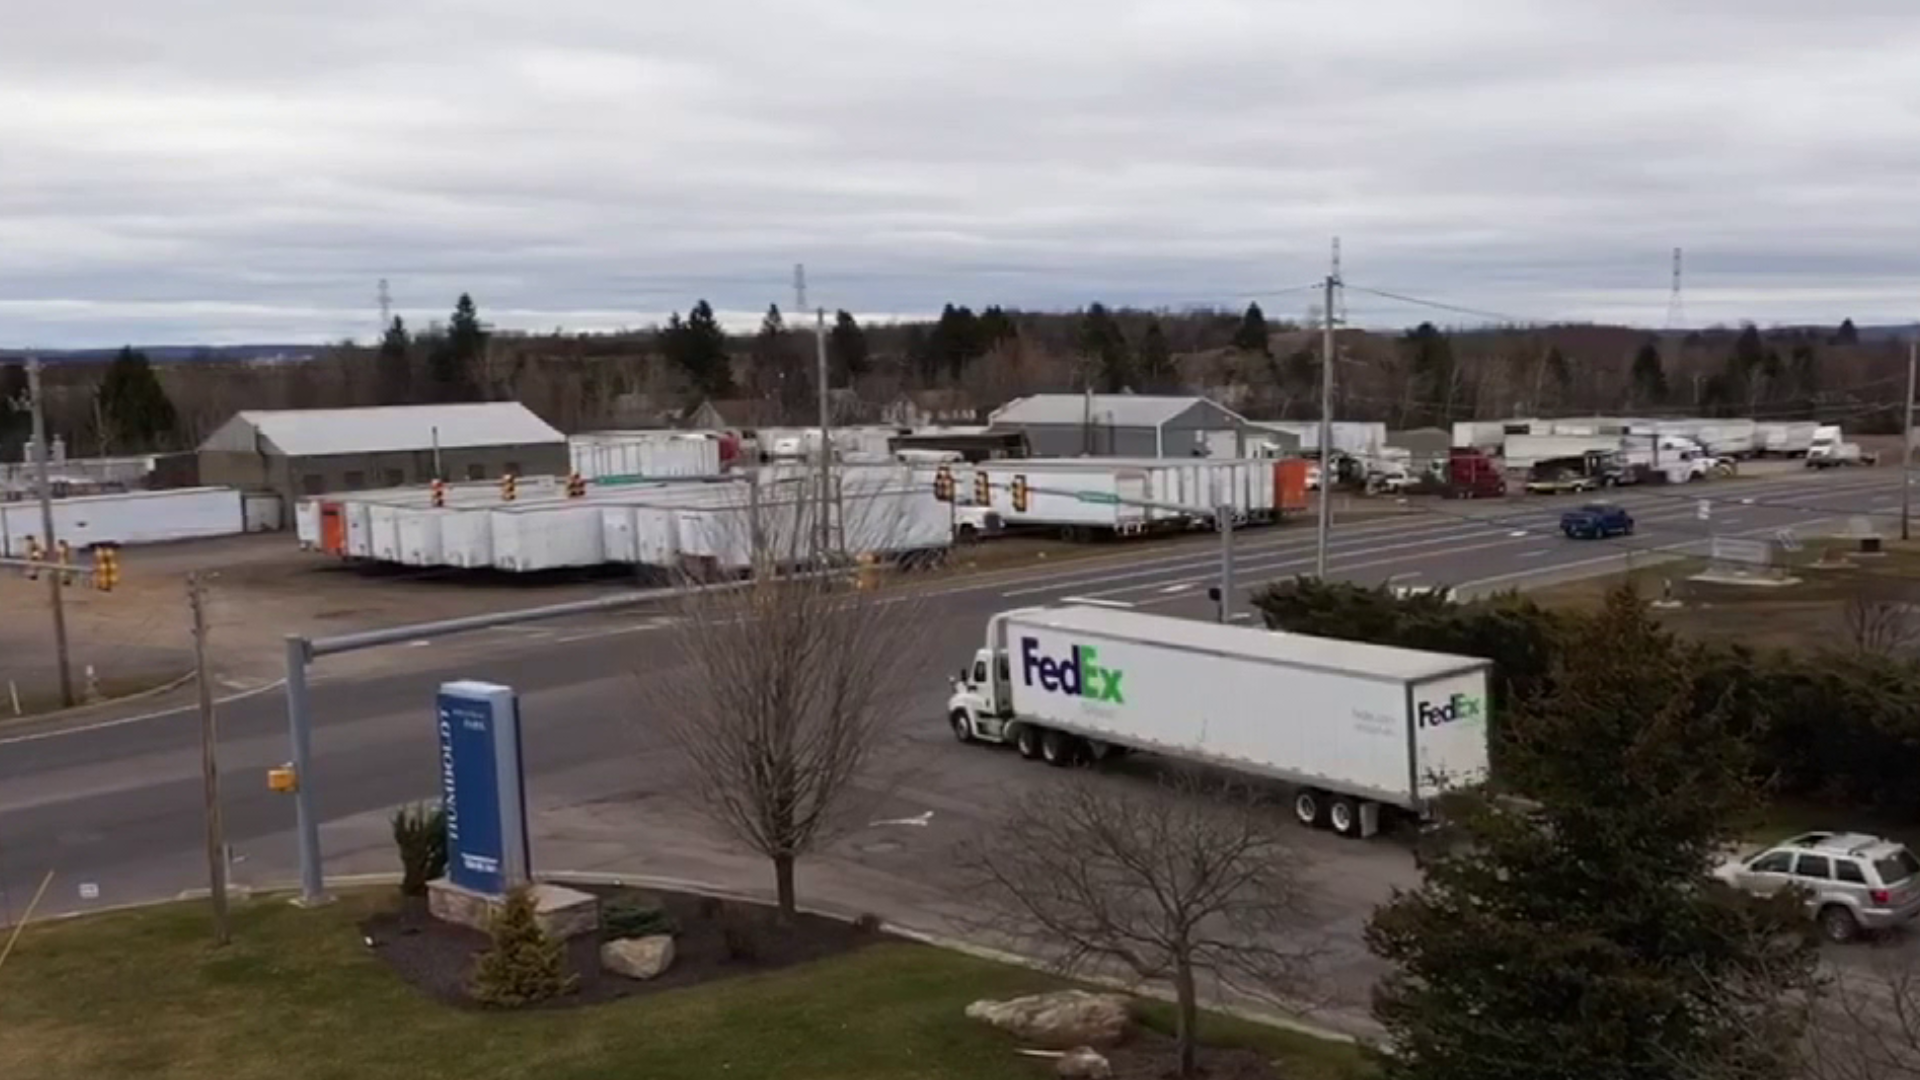 Hazleton was mentioned in the CBS news program 60 minutes over the weekend in a story that discussed the industrial parks and their working conditions.